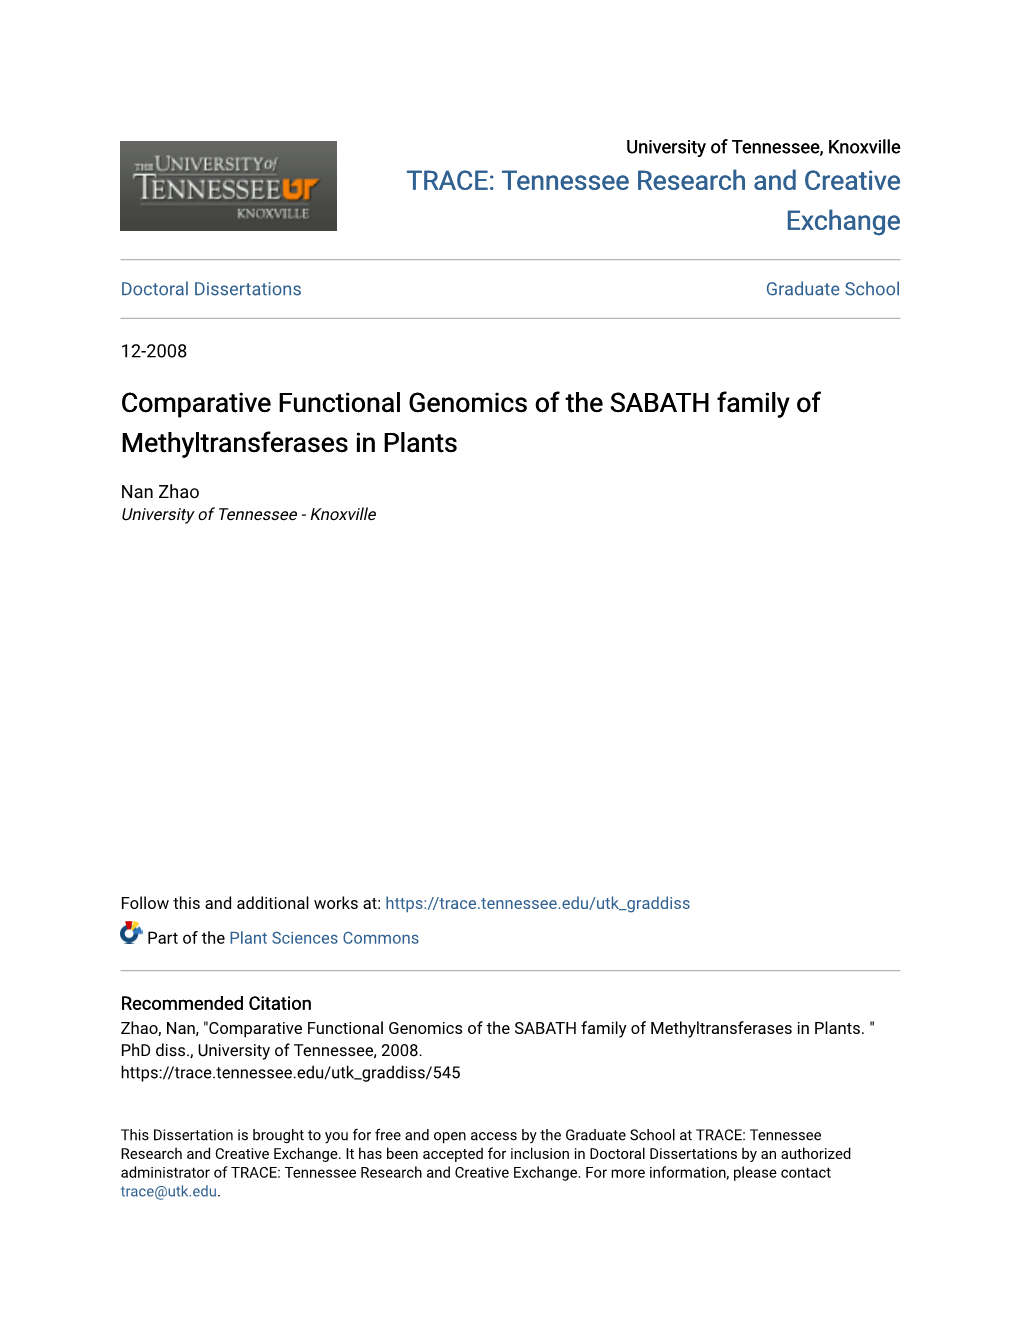 Comparative Functional Genomics of the SABATH Family of Methyltransferases in Plants